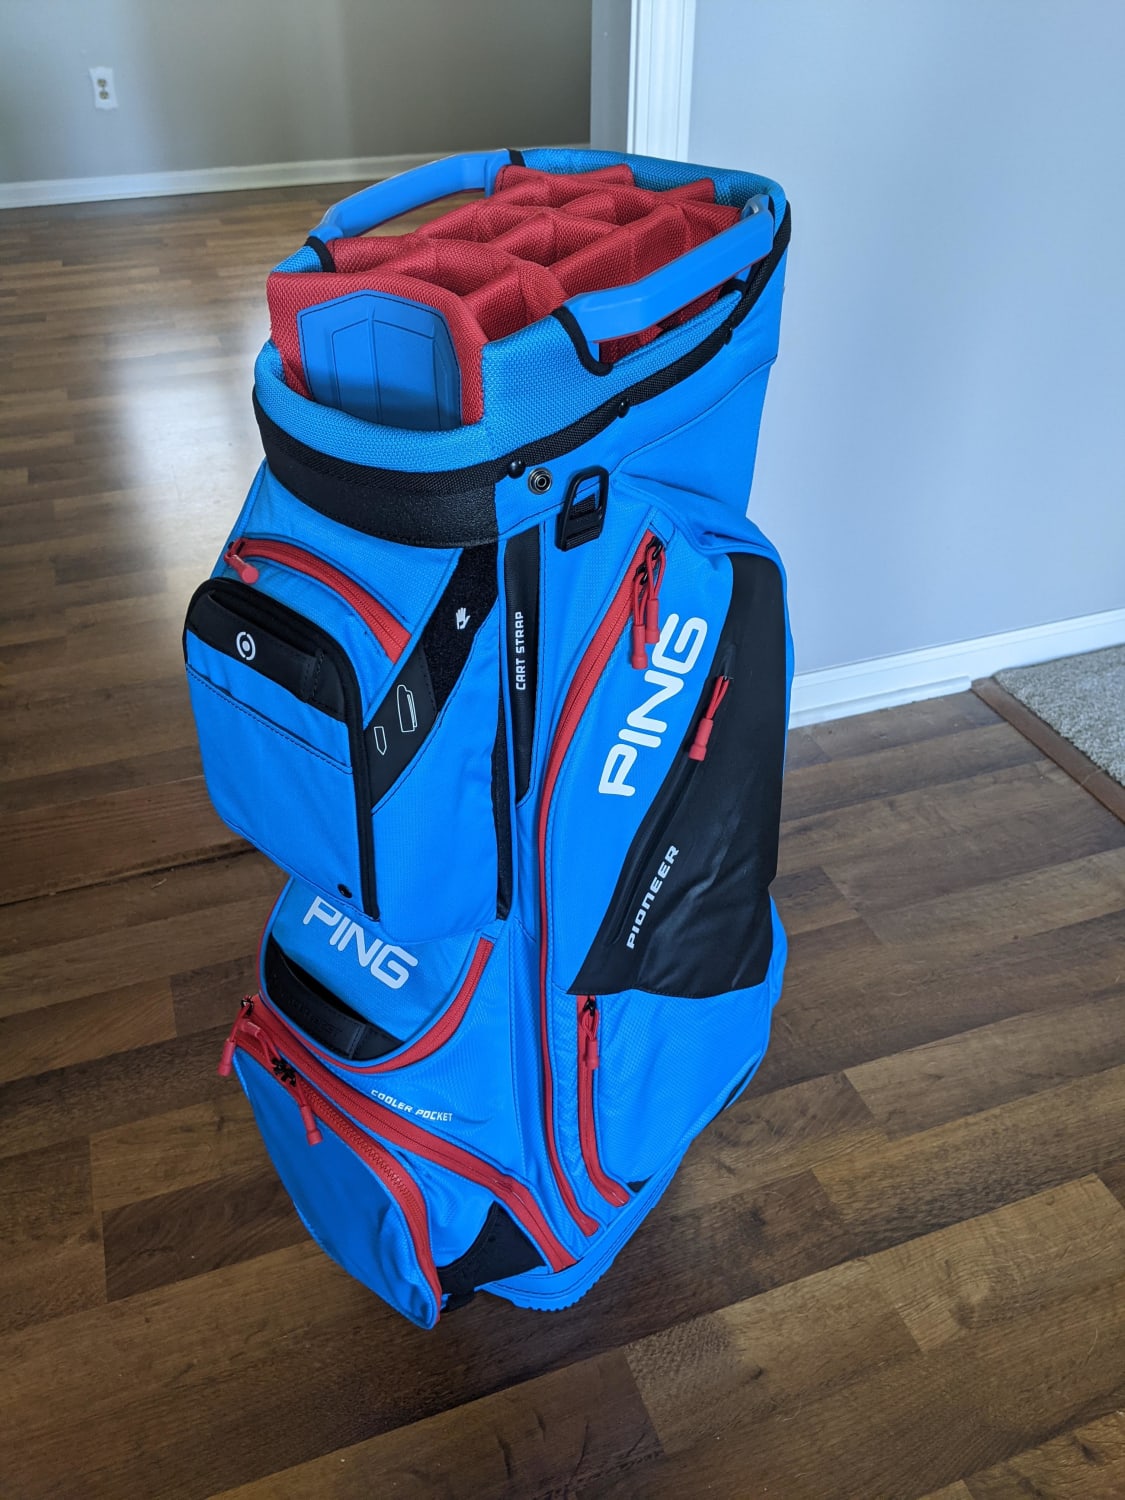 New bag day